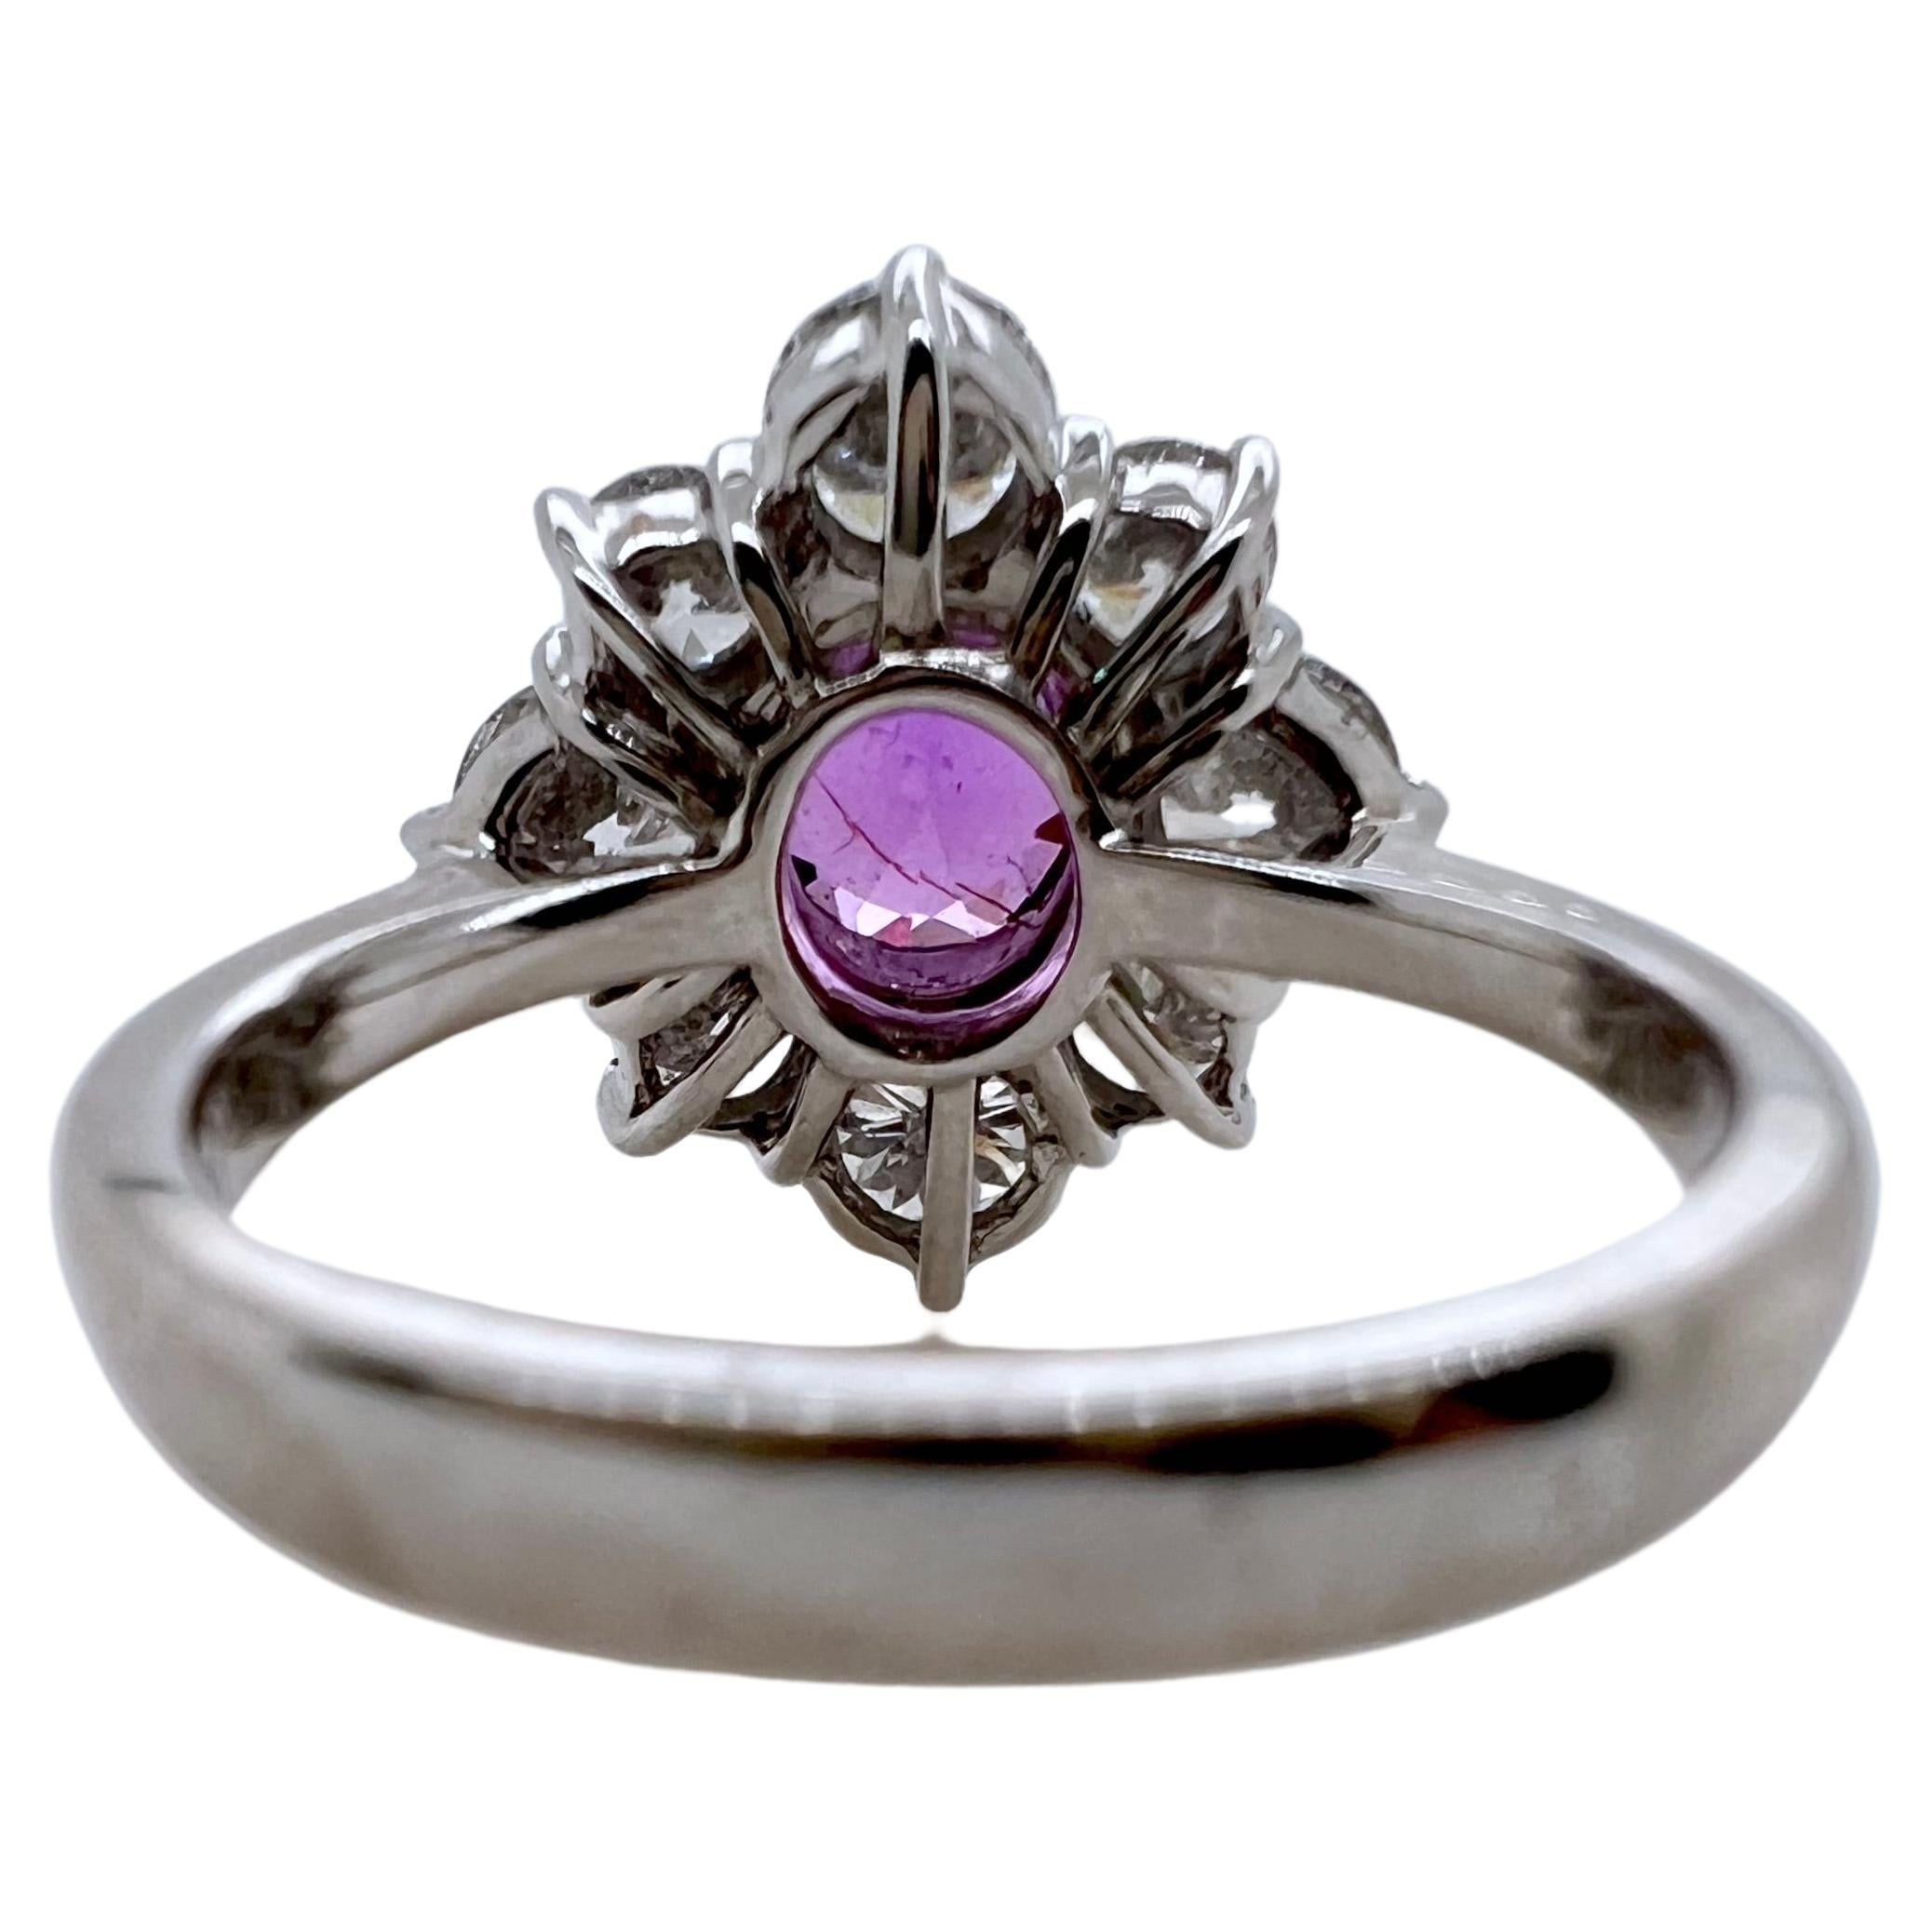 This stunning purple sapphire is set in a handmade 19k white gold diamond setting.  The sapphire is GIA certified and unheated.  The beautiful color-tone against the bright, vibrant diamonds makes it stand out and will attract everyone's attention. 